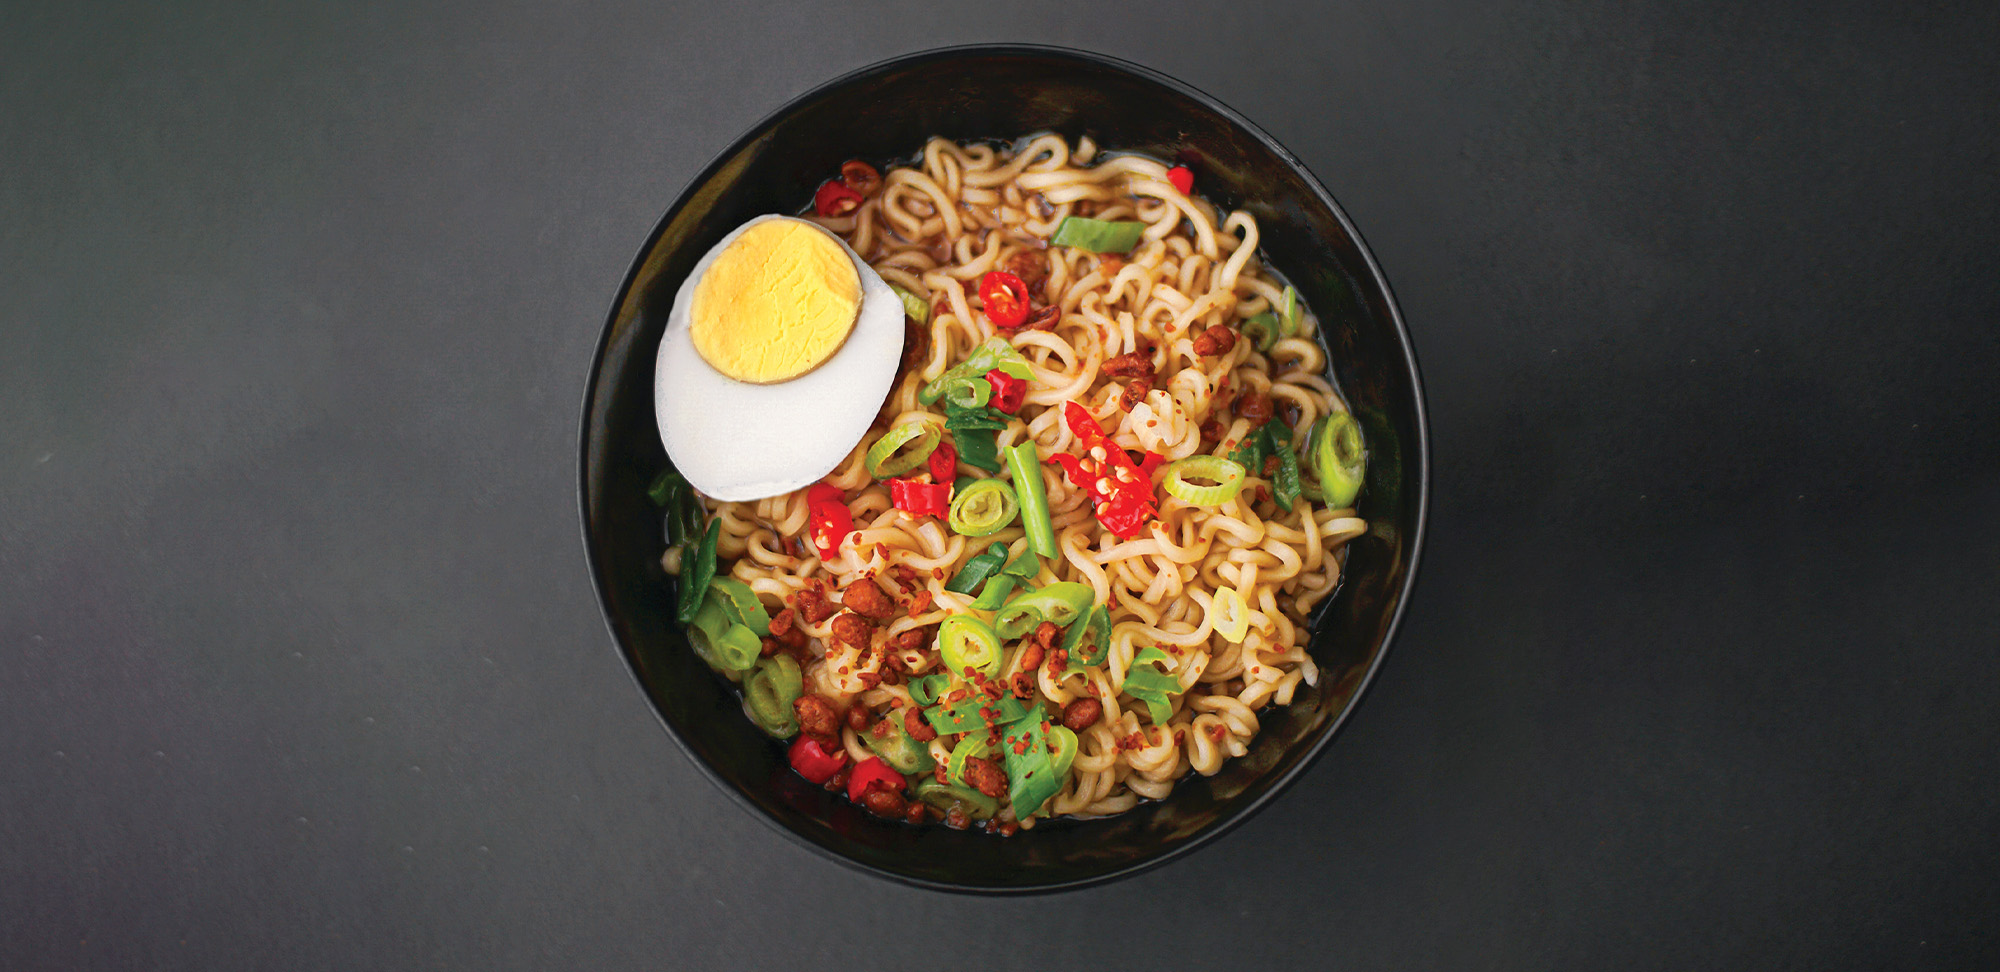 Bowl of noodles with green onion and egg